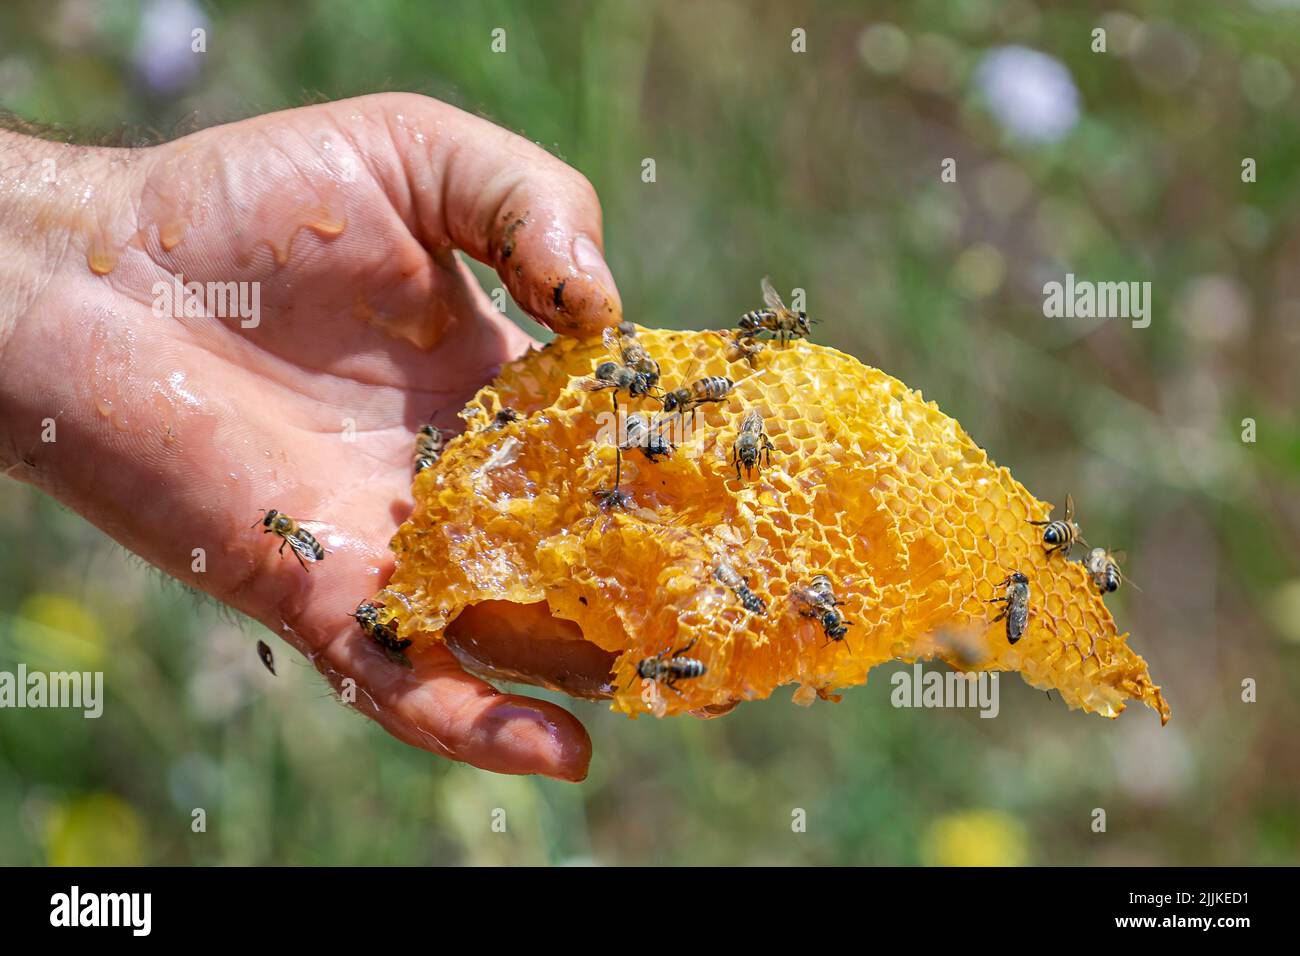 The Bees on small honeycomb held by apiarist Stock Photo